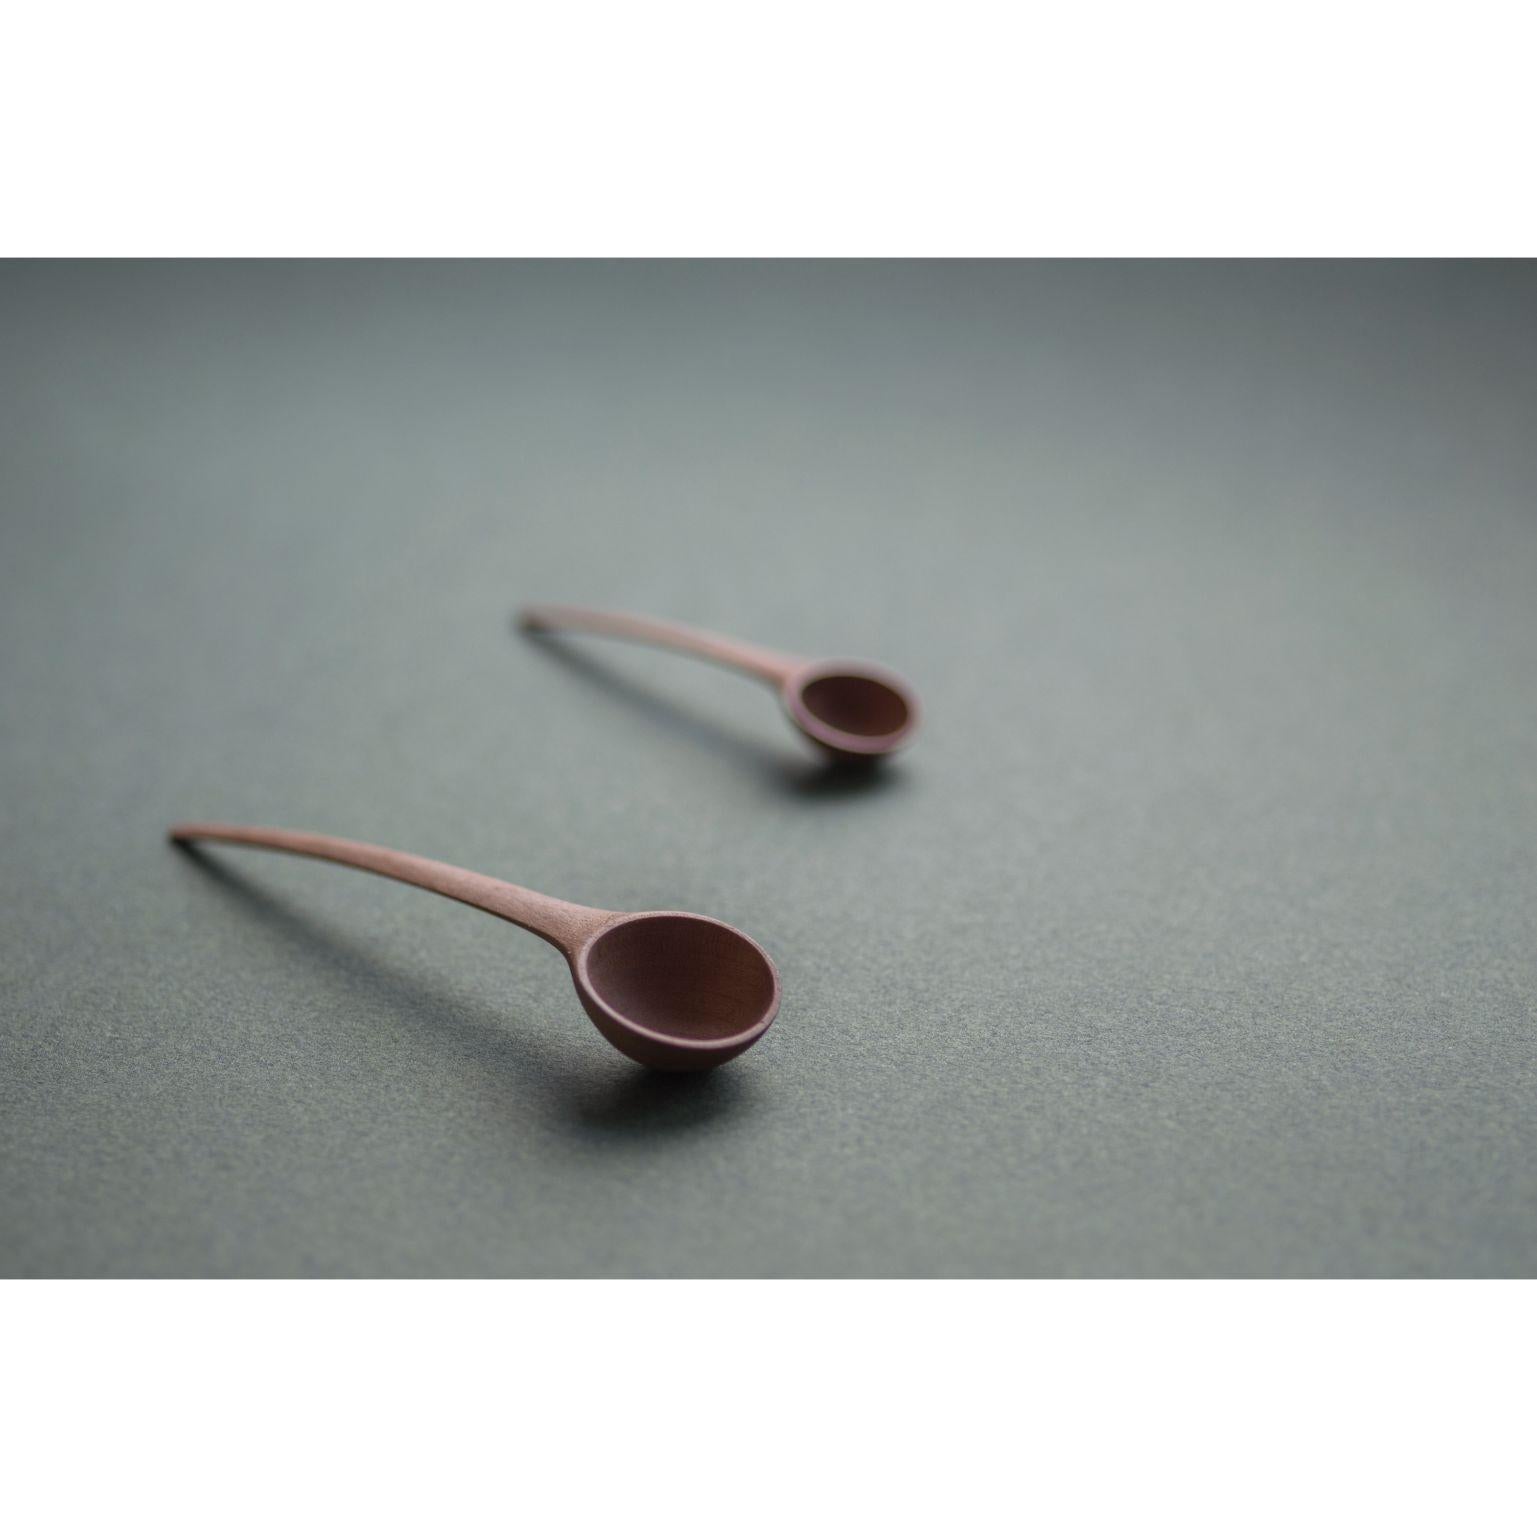 Set of 2 pisara spoons by Antrei Hartikainen
Materials: Walnut, maple, natural oil wax
Dimensions: W 7-10 cm

Also available in three sizes and a variety of woods

This range of small spoons are ideal for serving sugar, salt and other